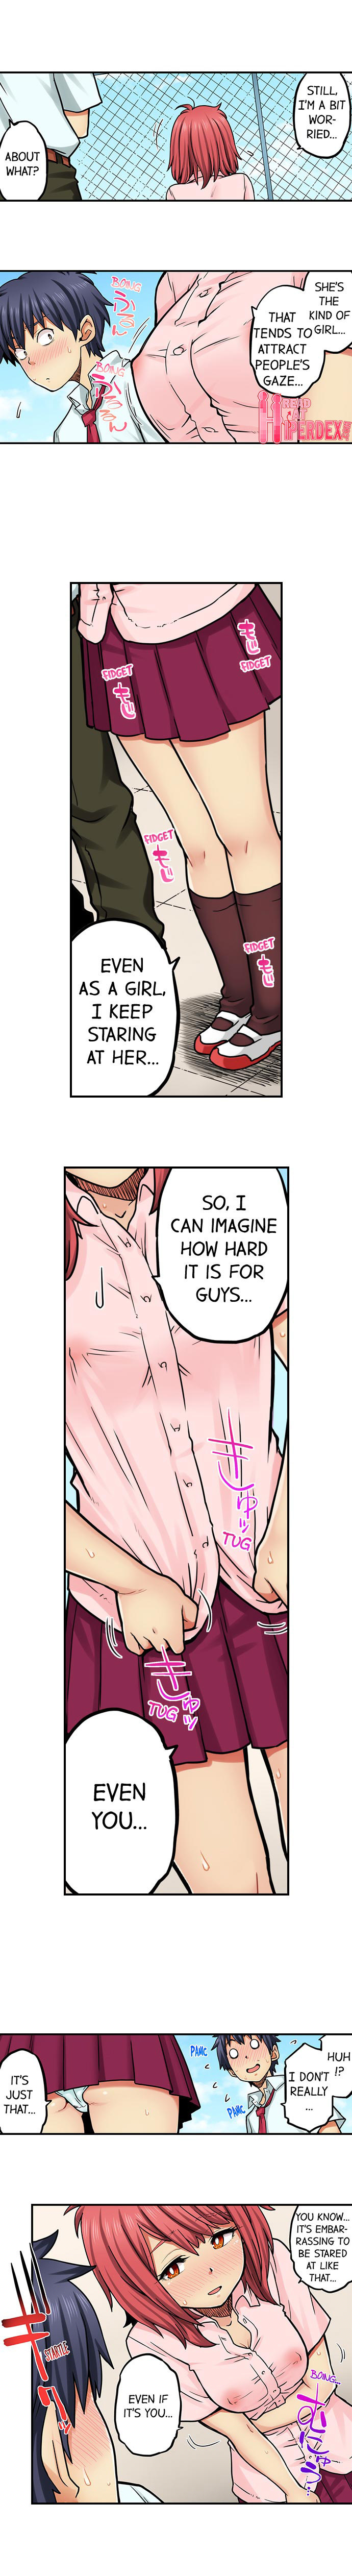 My Classmate is My Dad’s Bride, But in Bed She’s Mine - Chapter 66 Page 3